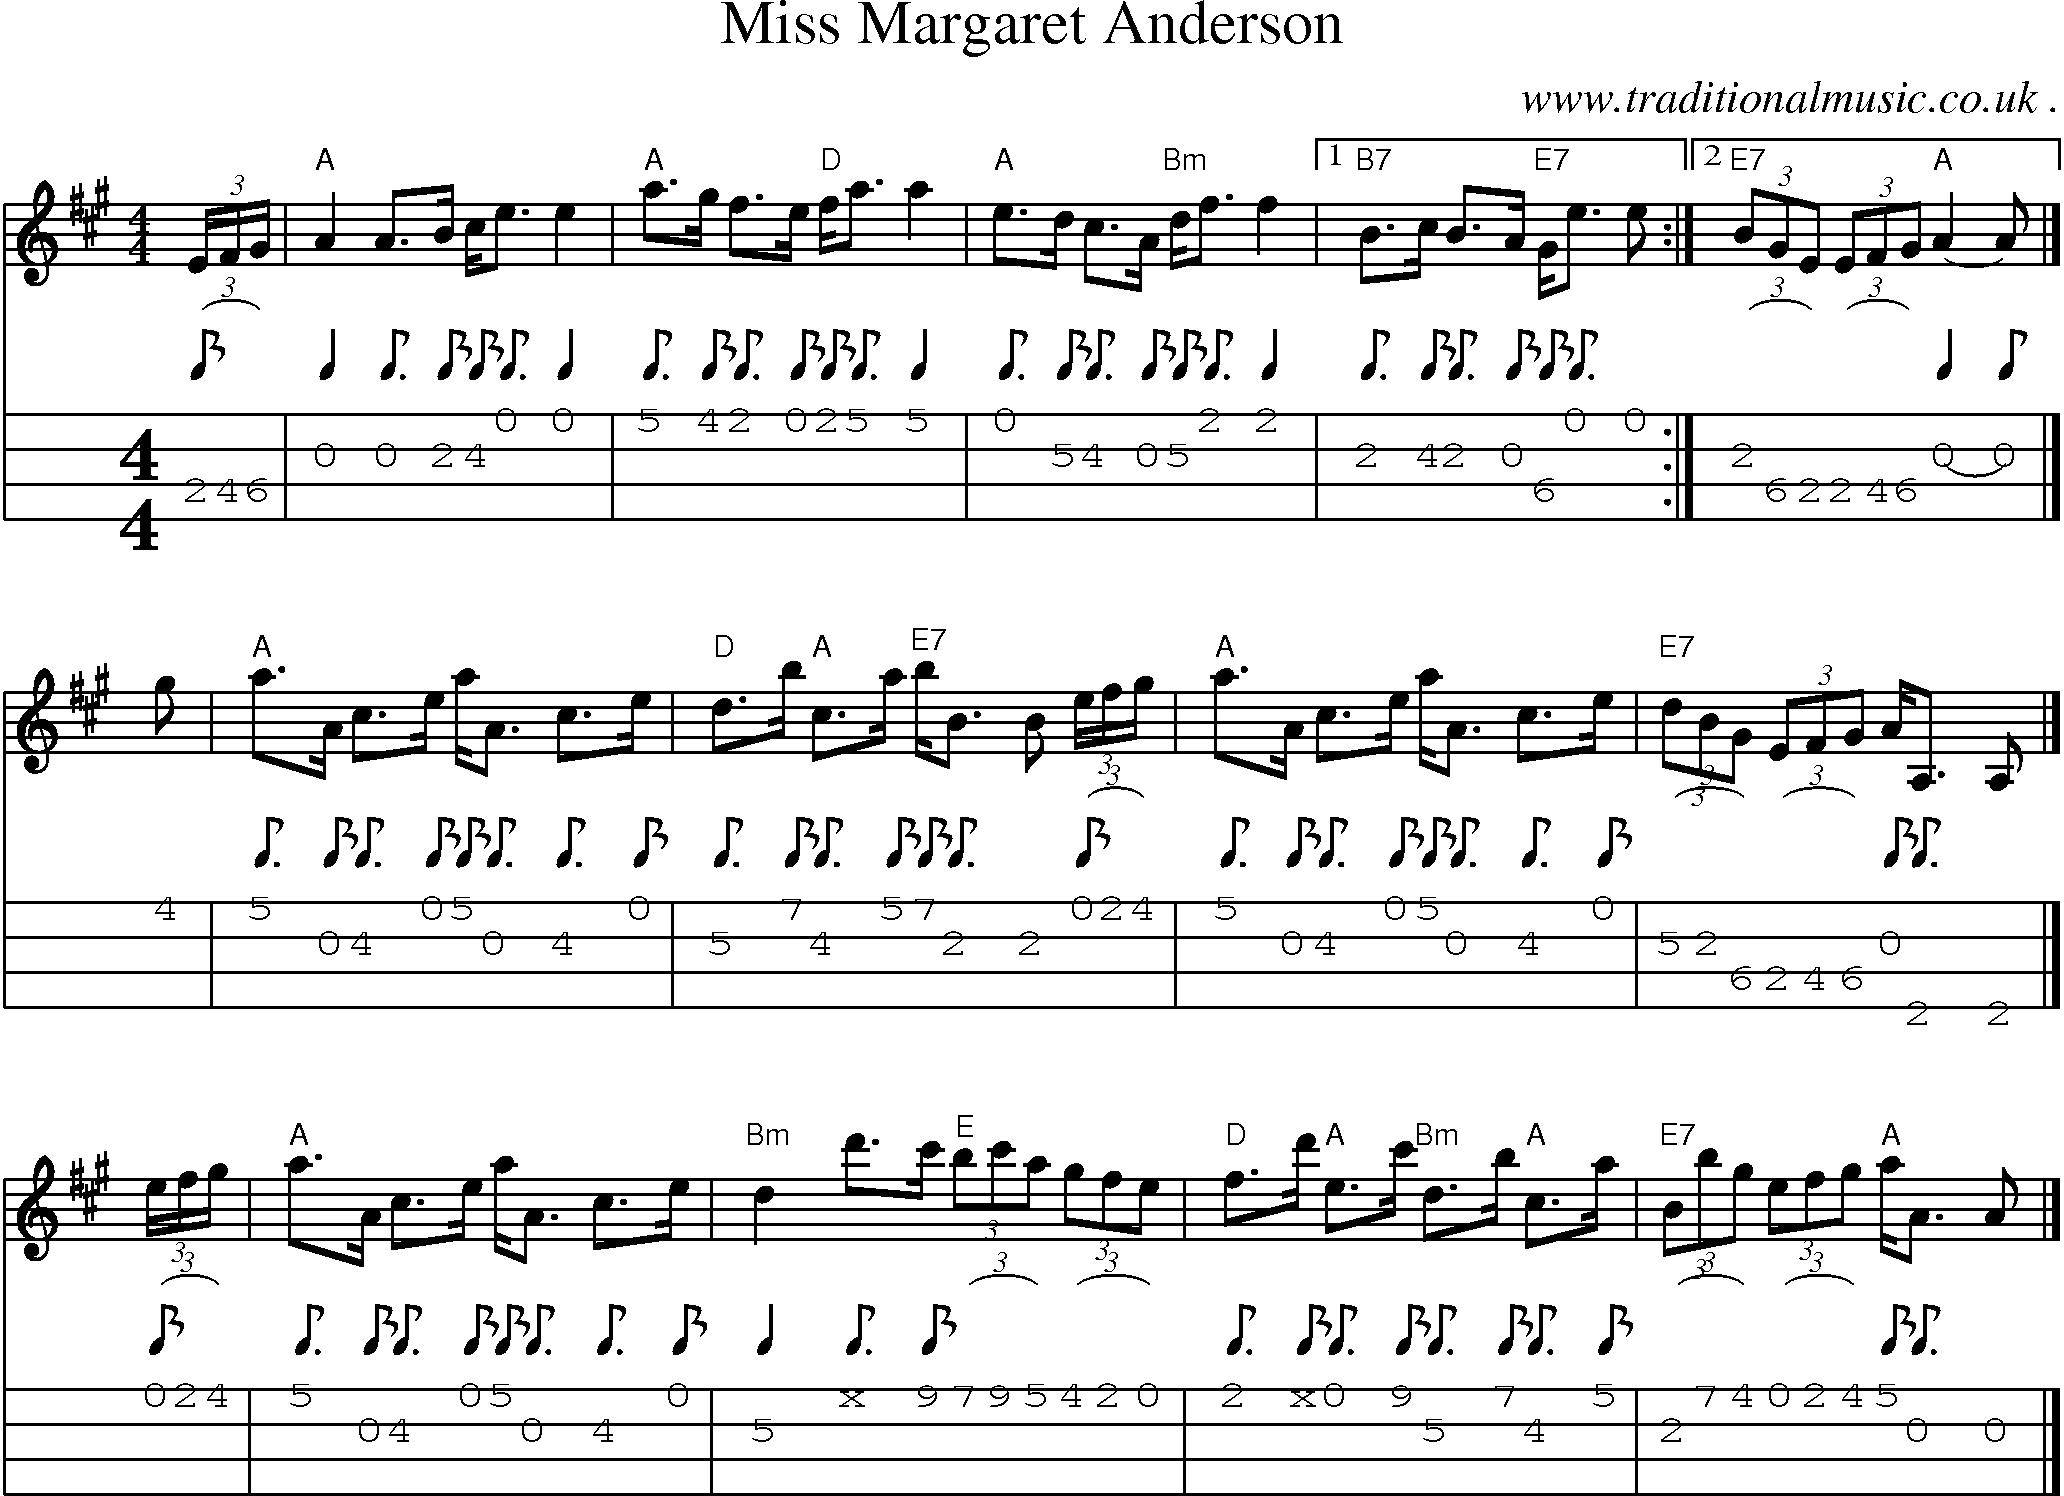 Sheet-music  score, Chords and Mandolin Tabs for Miss Margaret Anderson